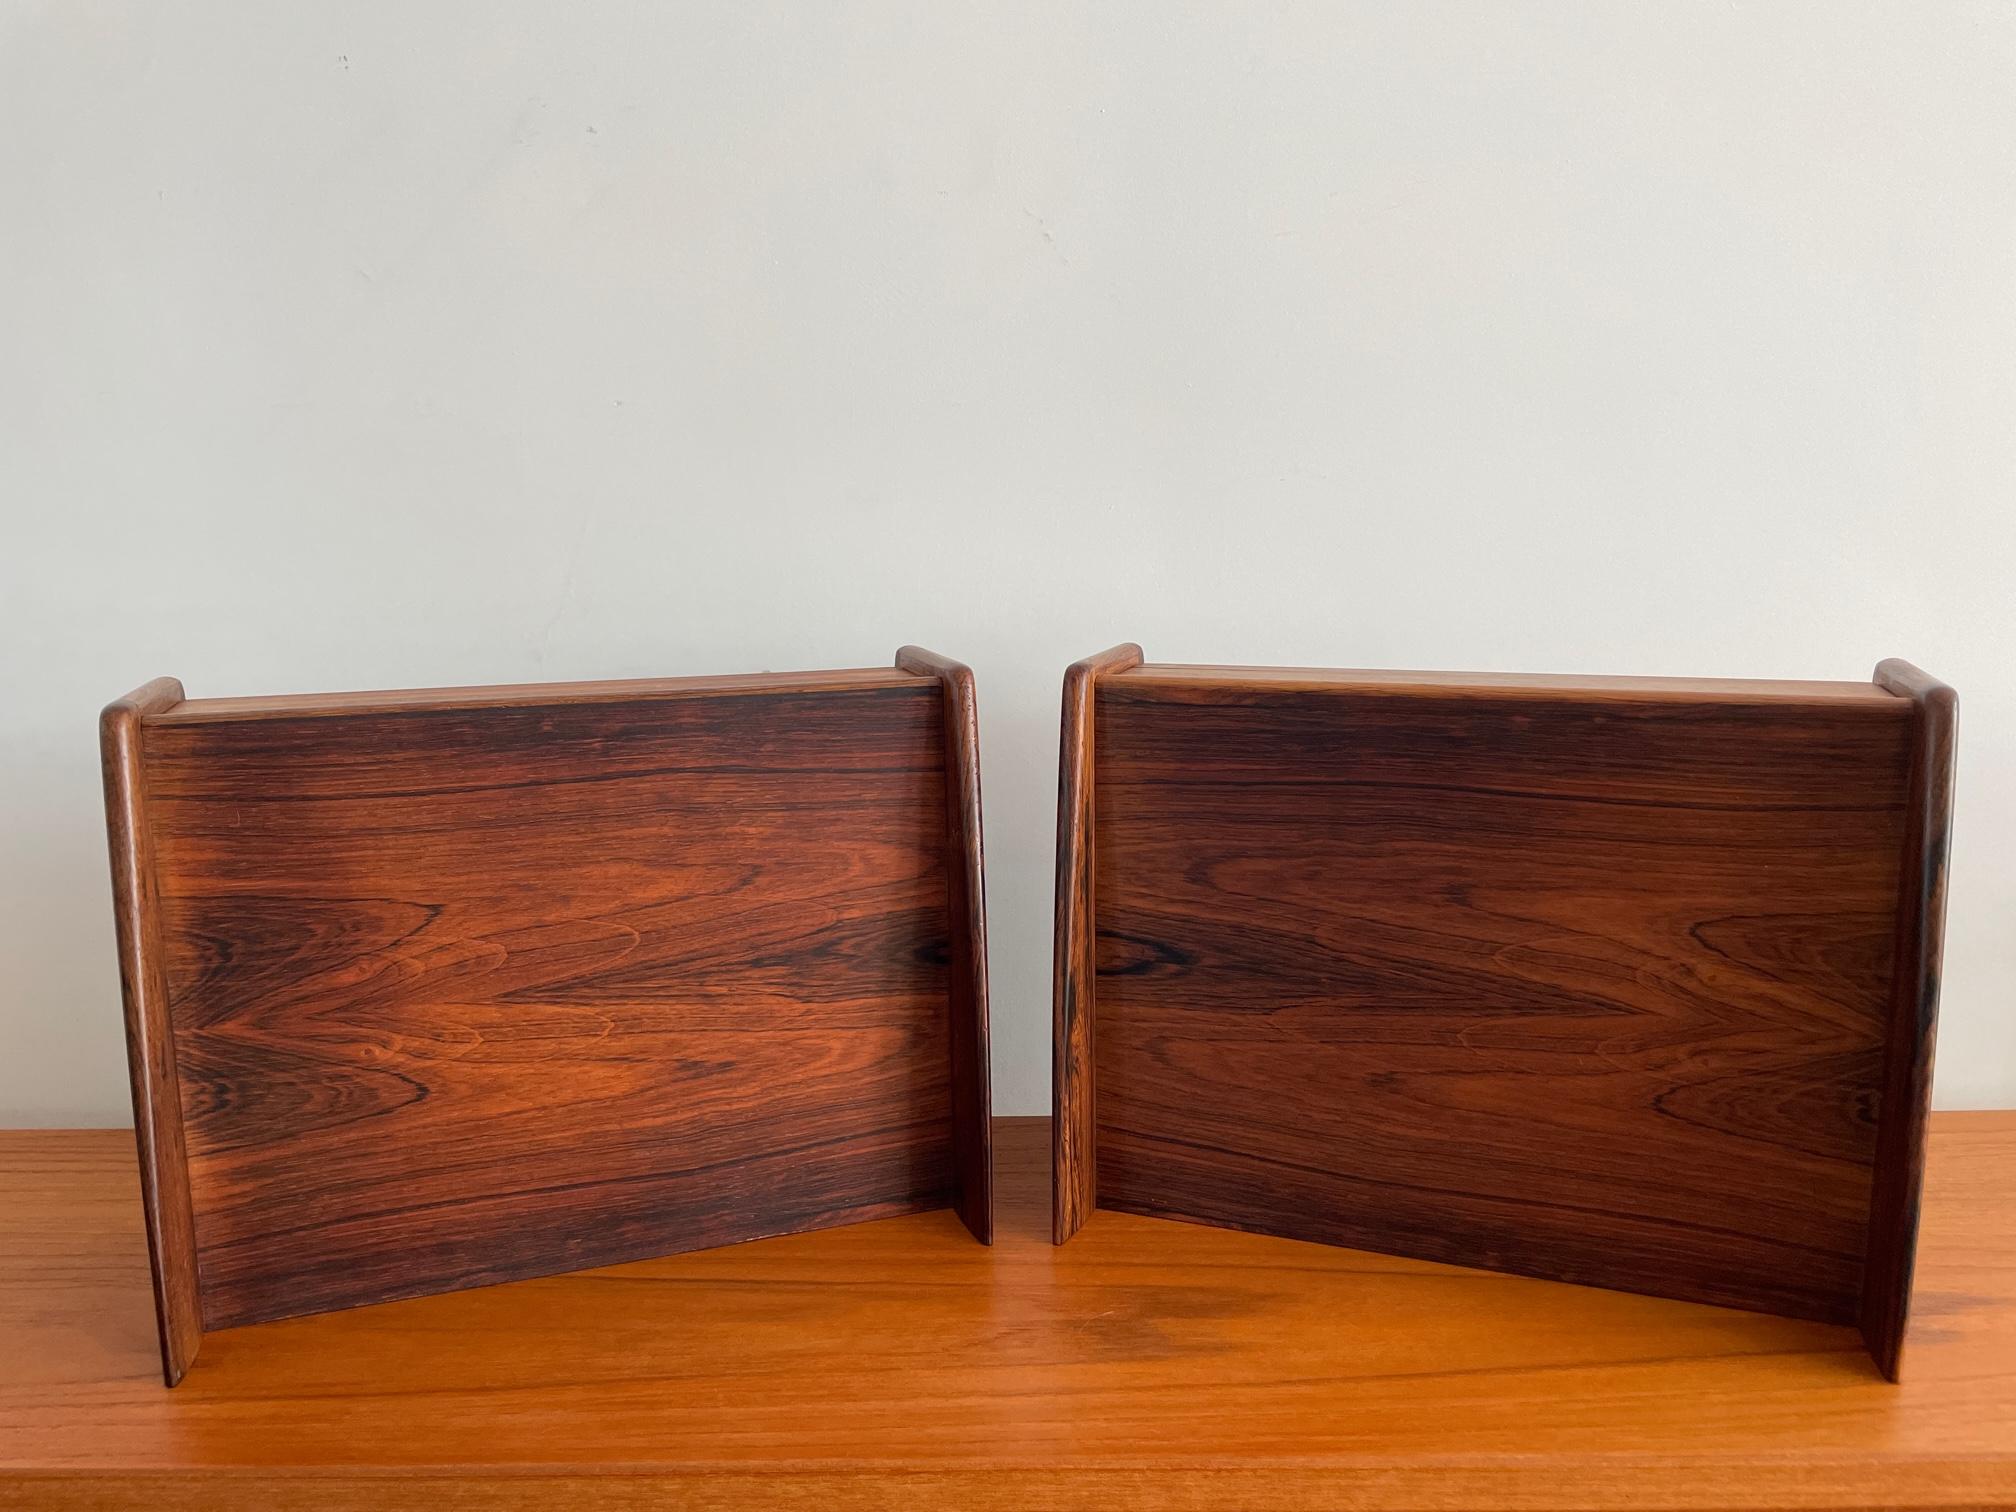 What a stunning pieces of furniture. Pair of mid century danish floating nightstands by Melvin Mikkelsen 1950s. Each with one drawer. The wood is and the craftmanship is just plain beautiful. Pure art! Beautiful wood graining. In very, very good